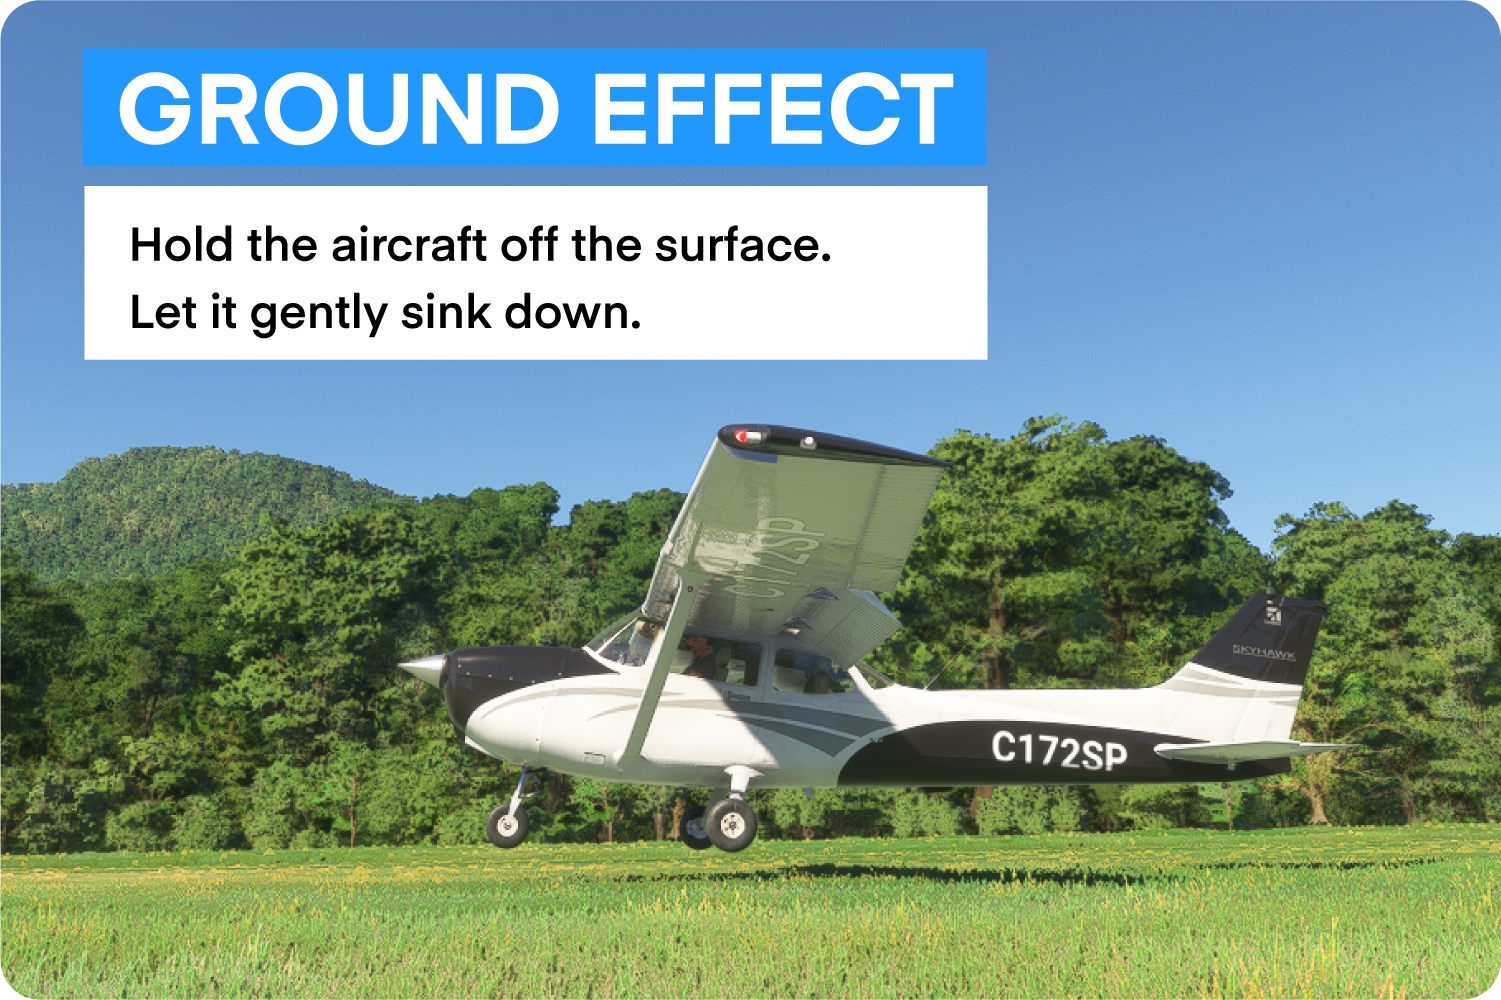 Aircraft flying in ground effect above grass runway.